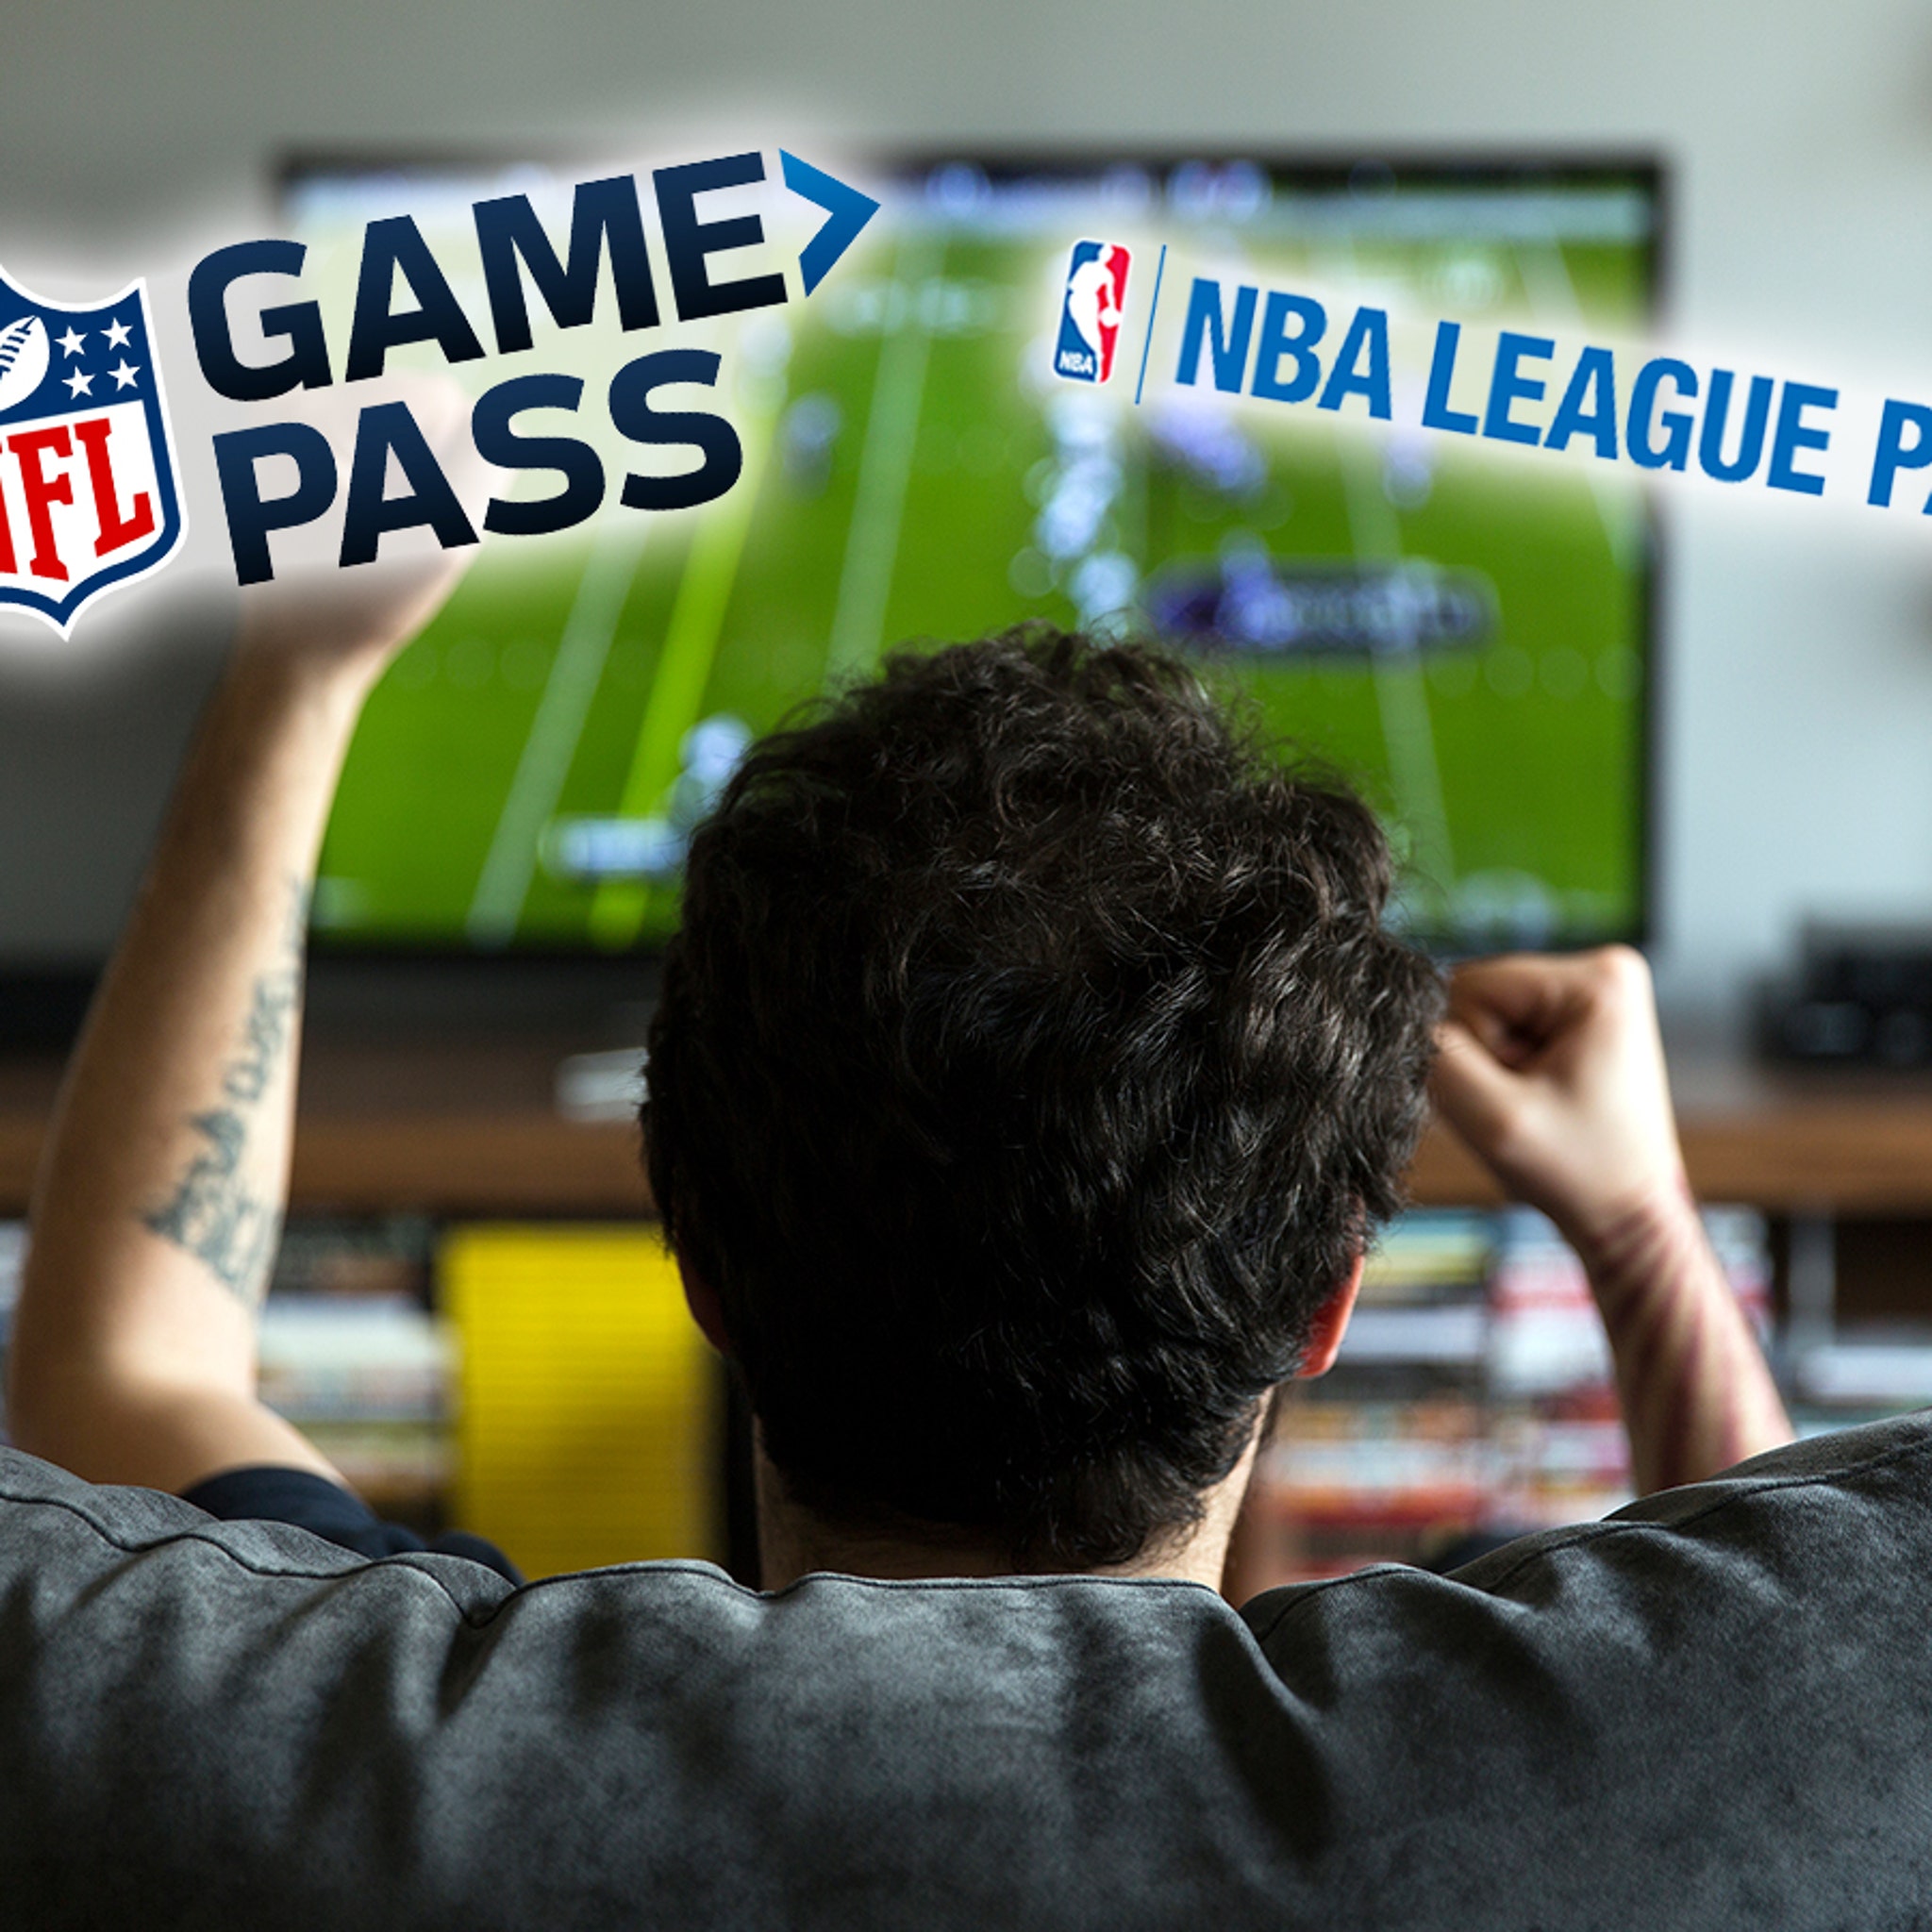 NFL, NBA Offering Free Game Pass and League Pass, Happy Self-Quarantining!